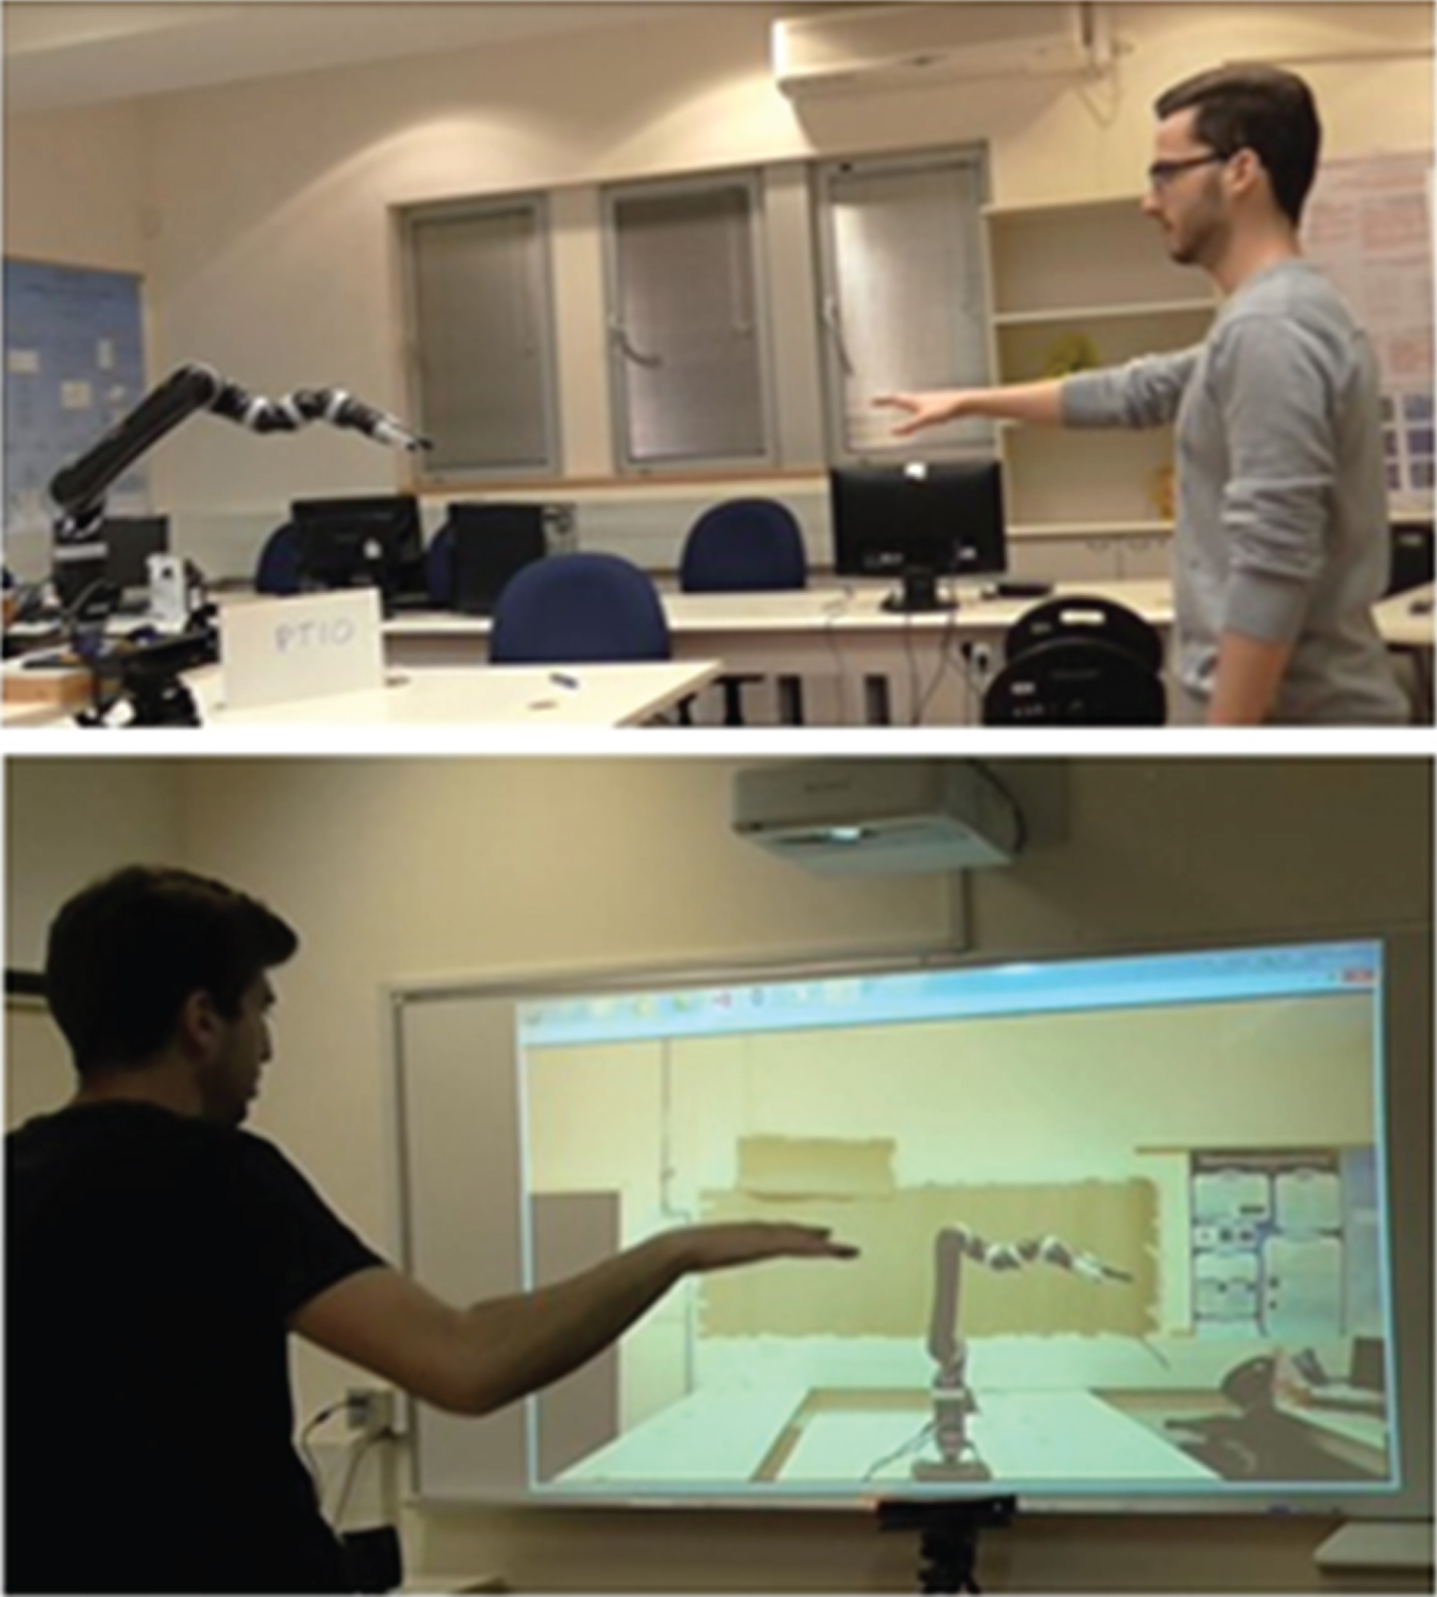 The experimental setup in (Levy-Tzedek et al., 2017). Top: a participant playing with the robotic arm. Bottom: a participant playing with the projection of the robotic arm on a screen.